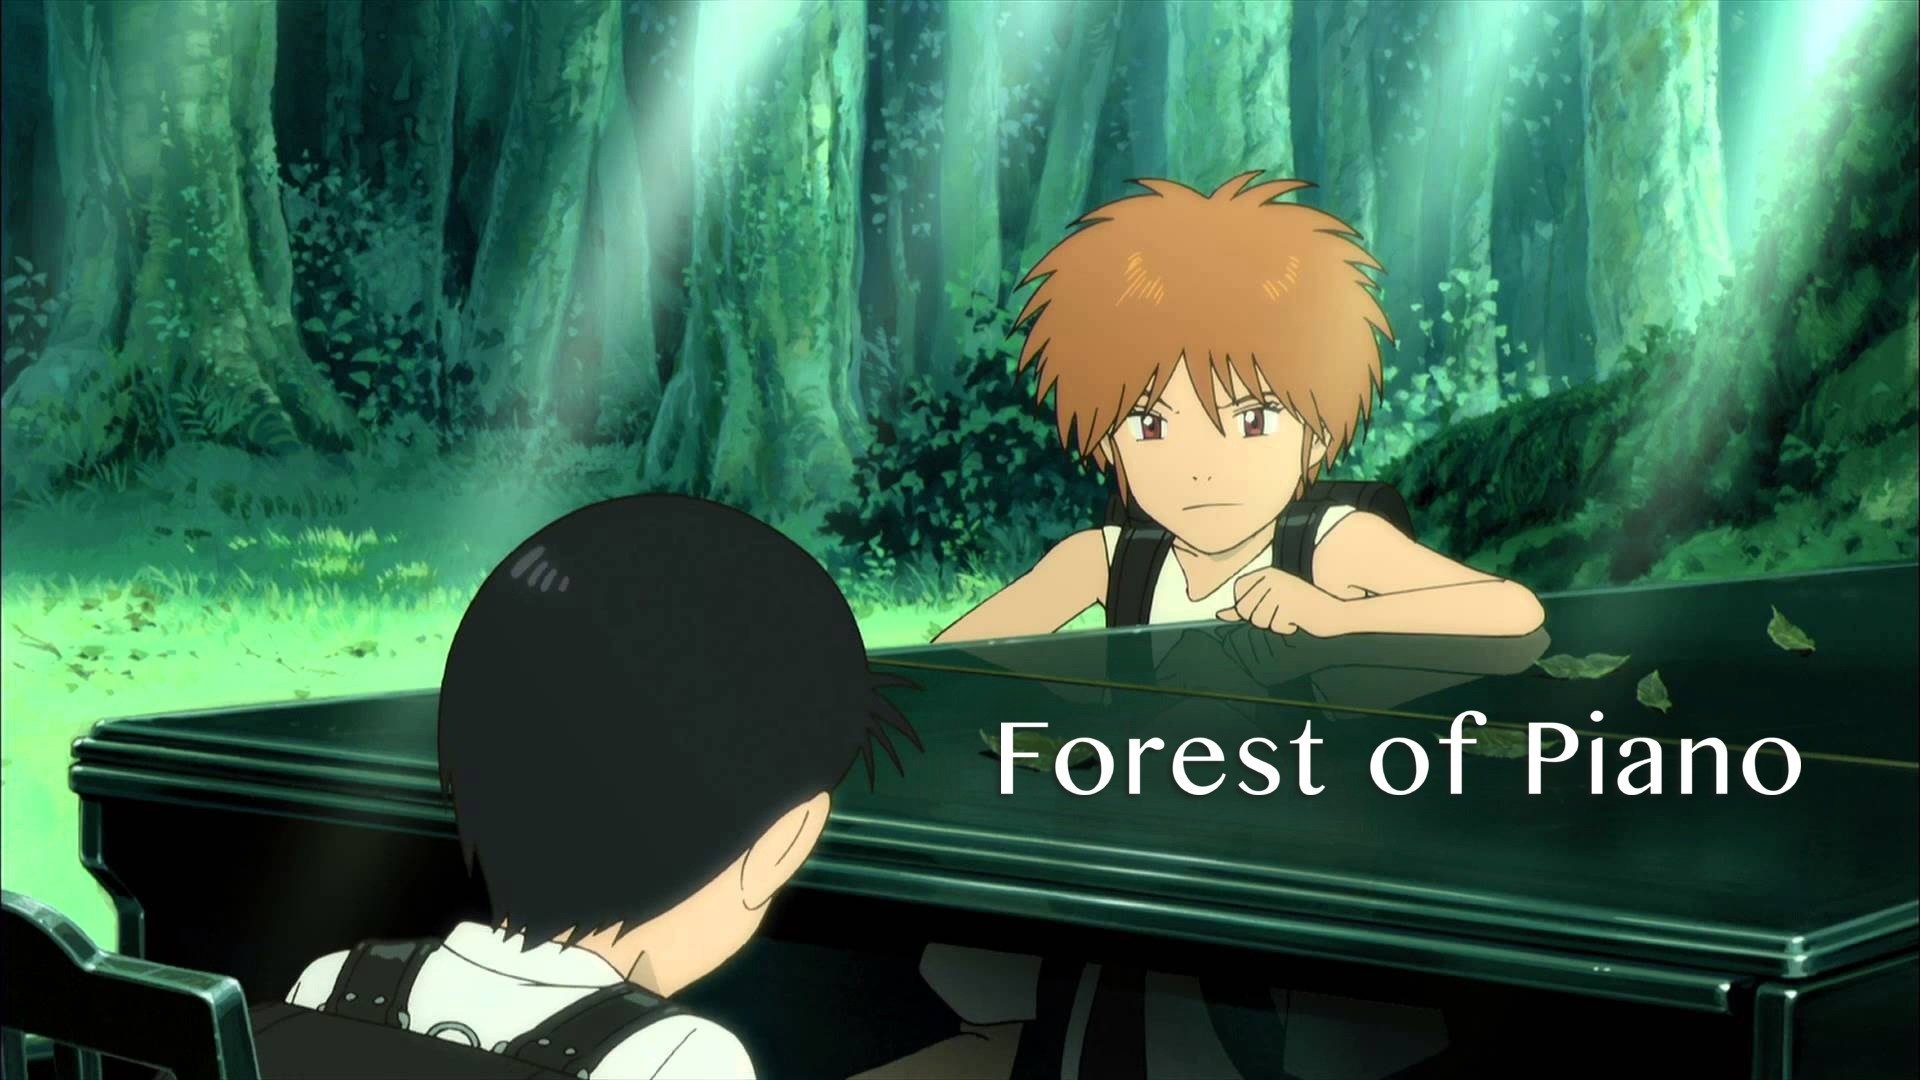 Anime Boy Playing Piano in The Forest, Music Poster HD Print on Canvas  Painting Wall Art for Living Room Decor Boy Gift : Amazon.com.au: Home